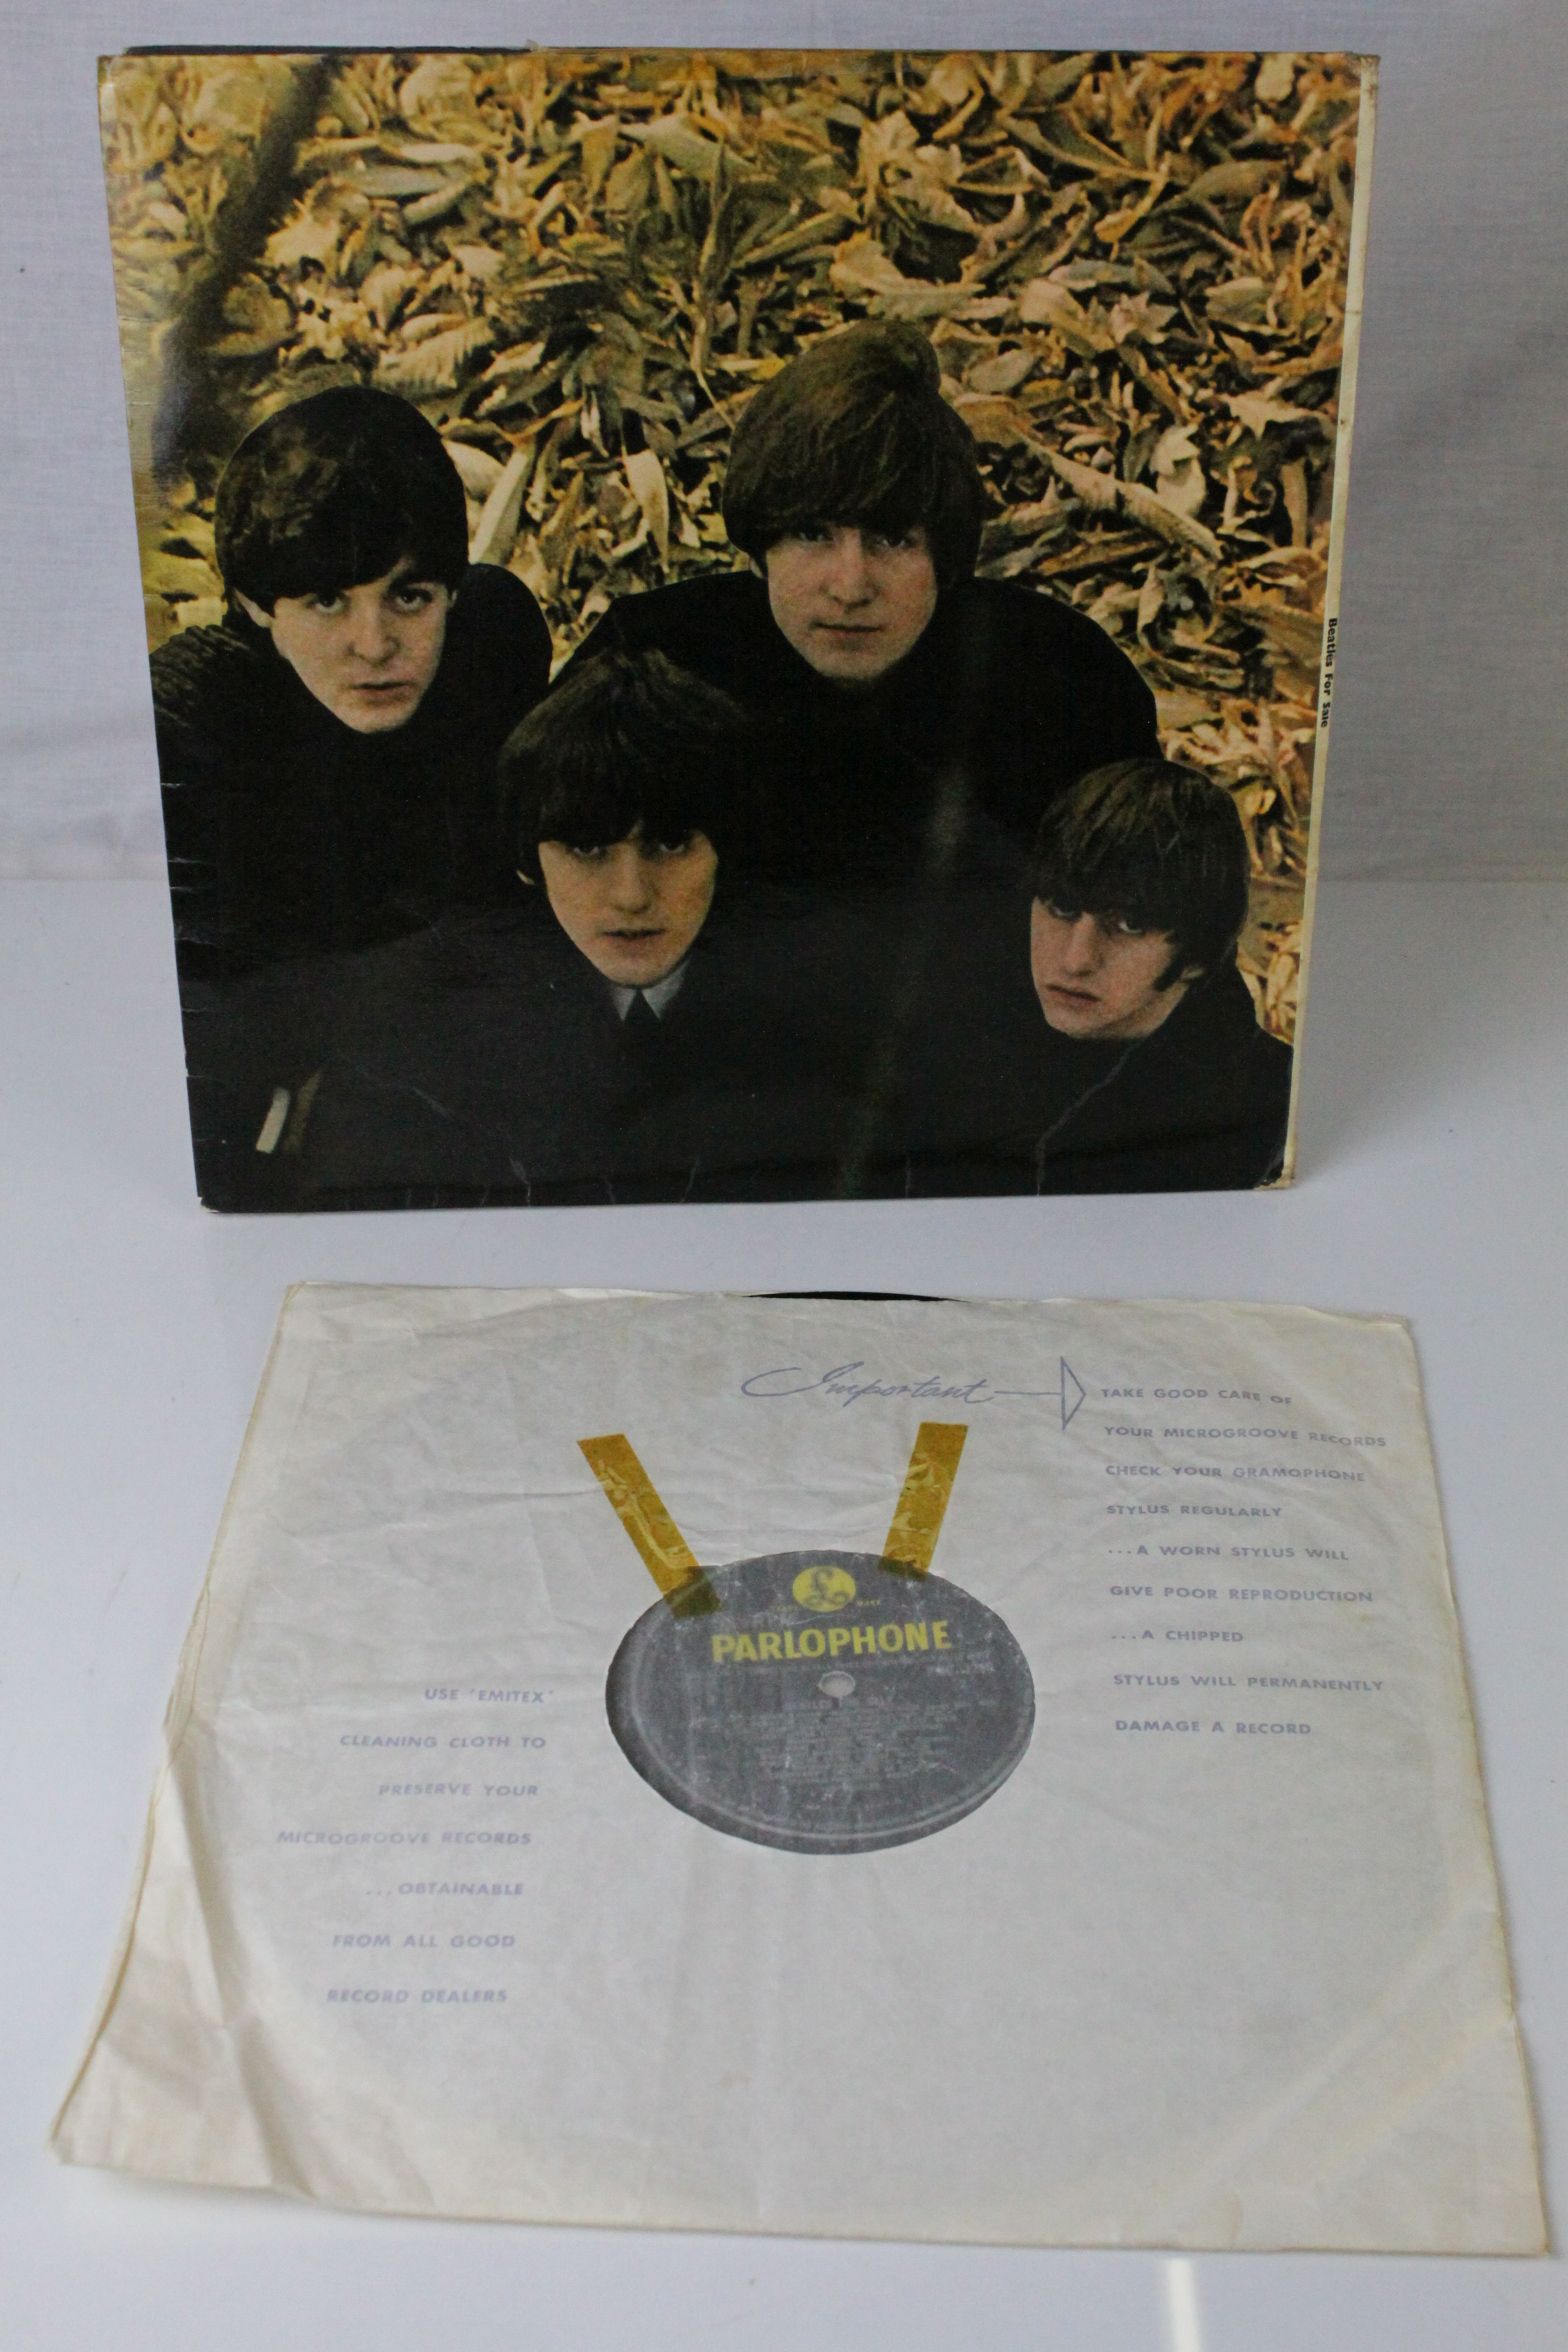 Vinyl - Four The Beatles LPs to include For Sale PMC1240 mono, Revolver PMC7009 mono, With The - Image 20 of 21